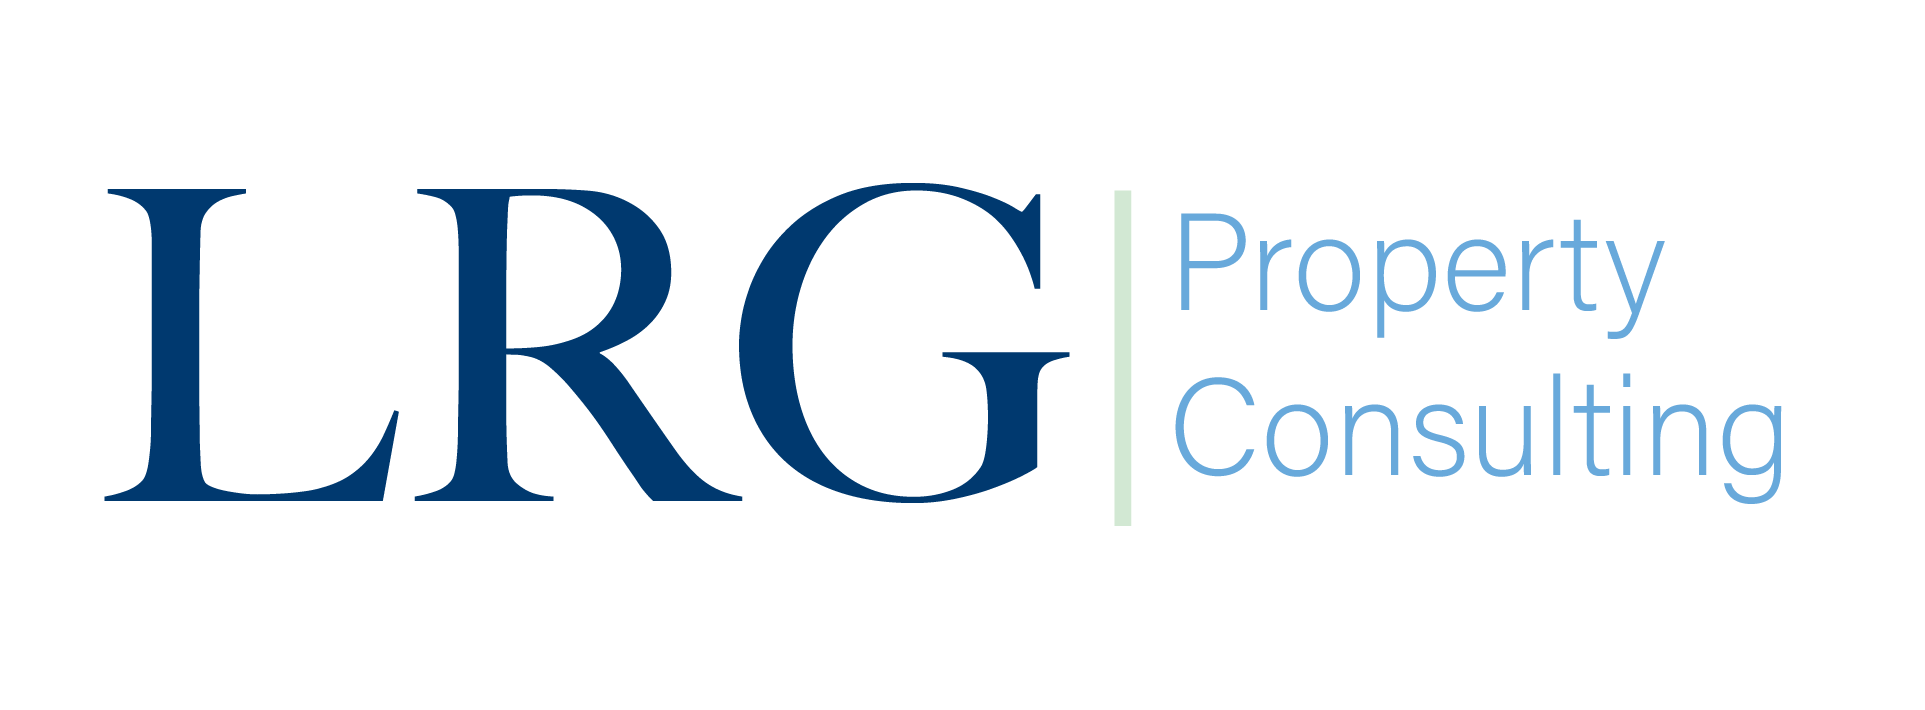 LRG Property Consulting